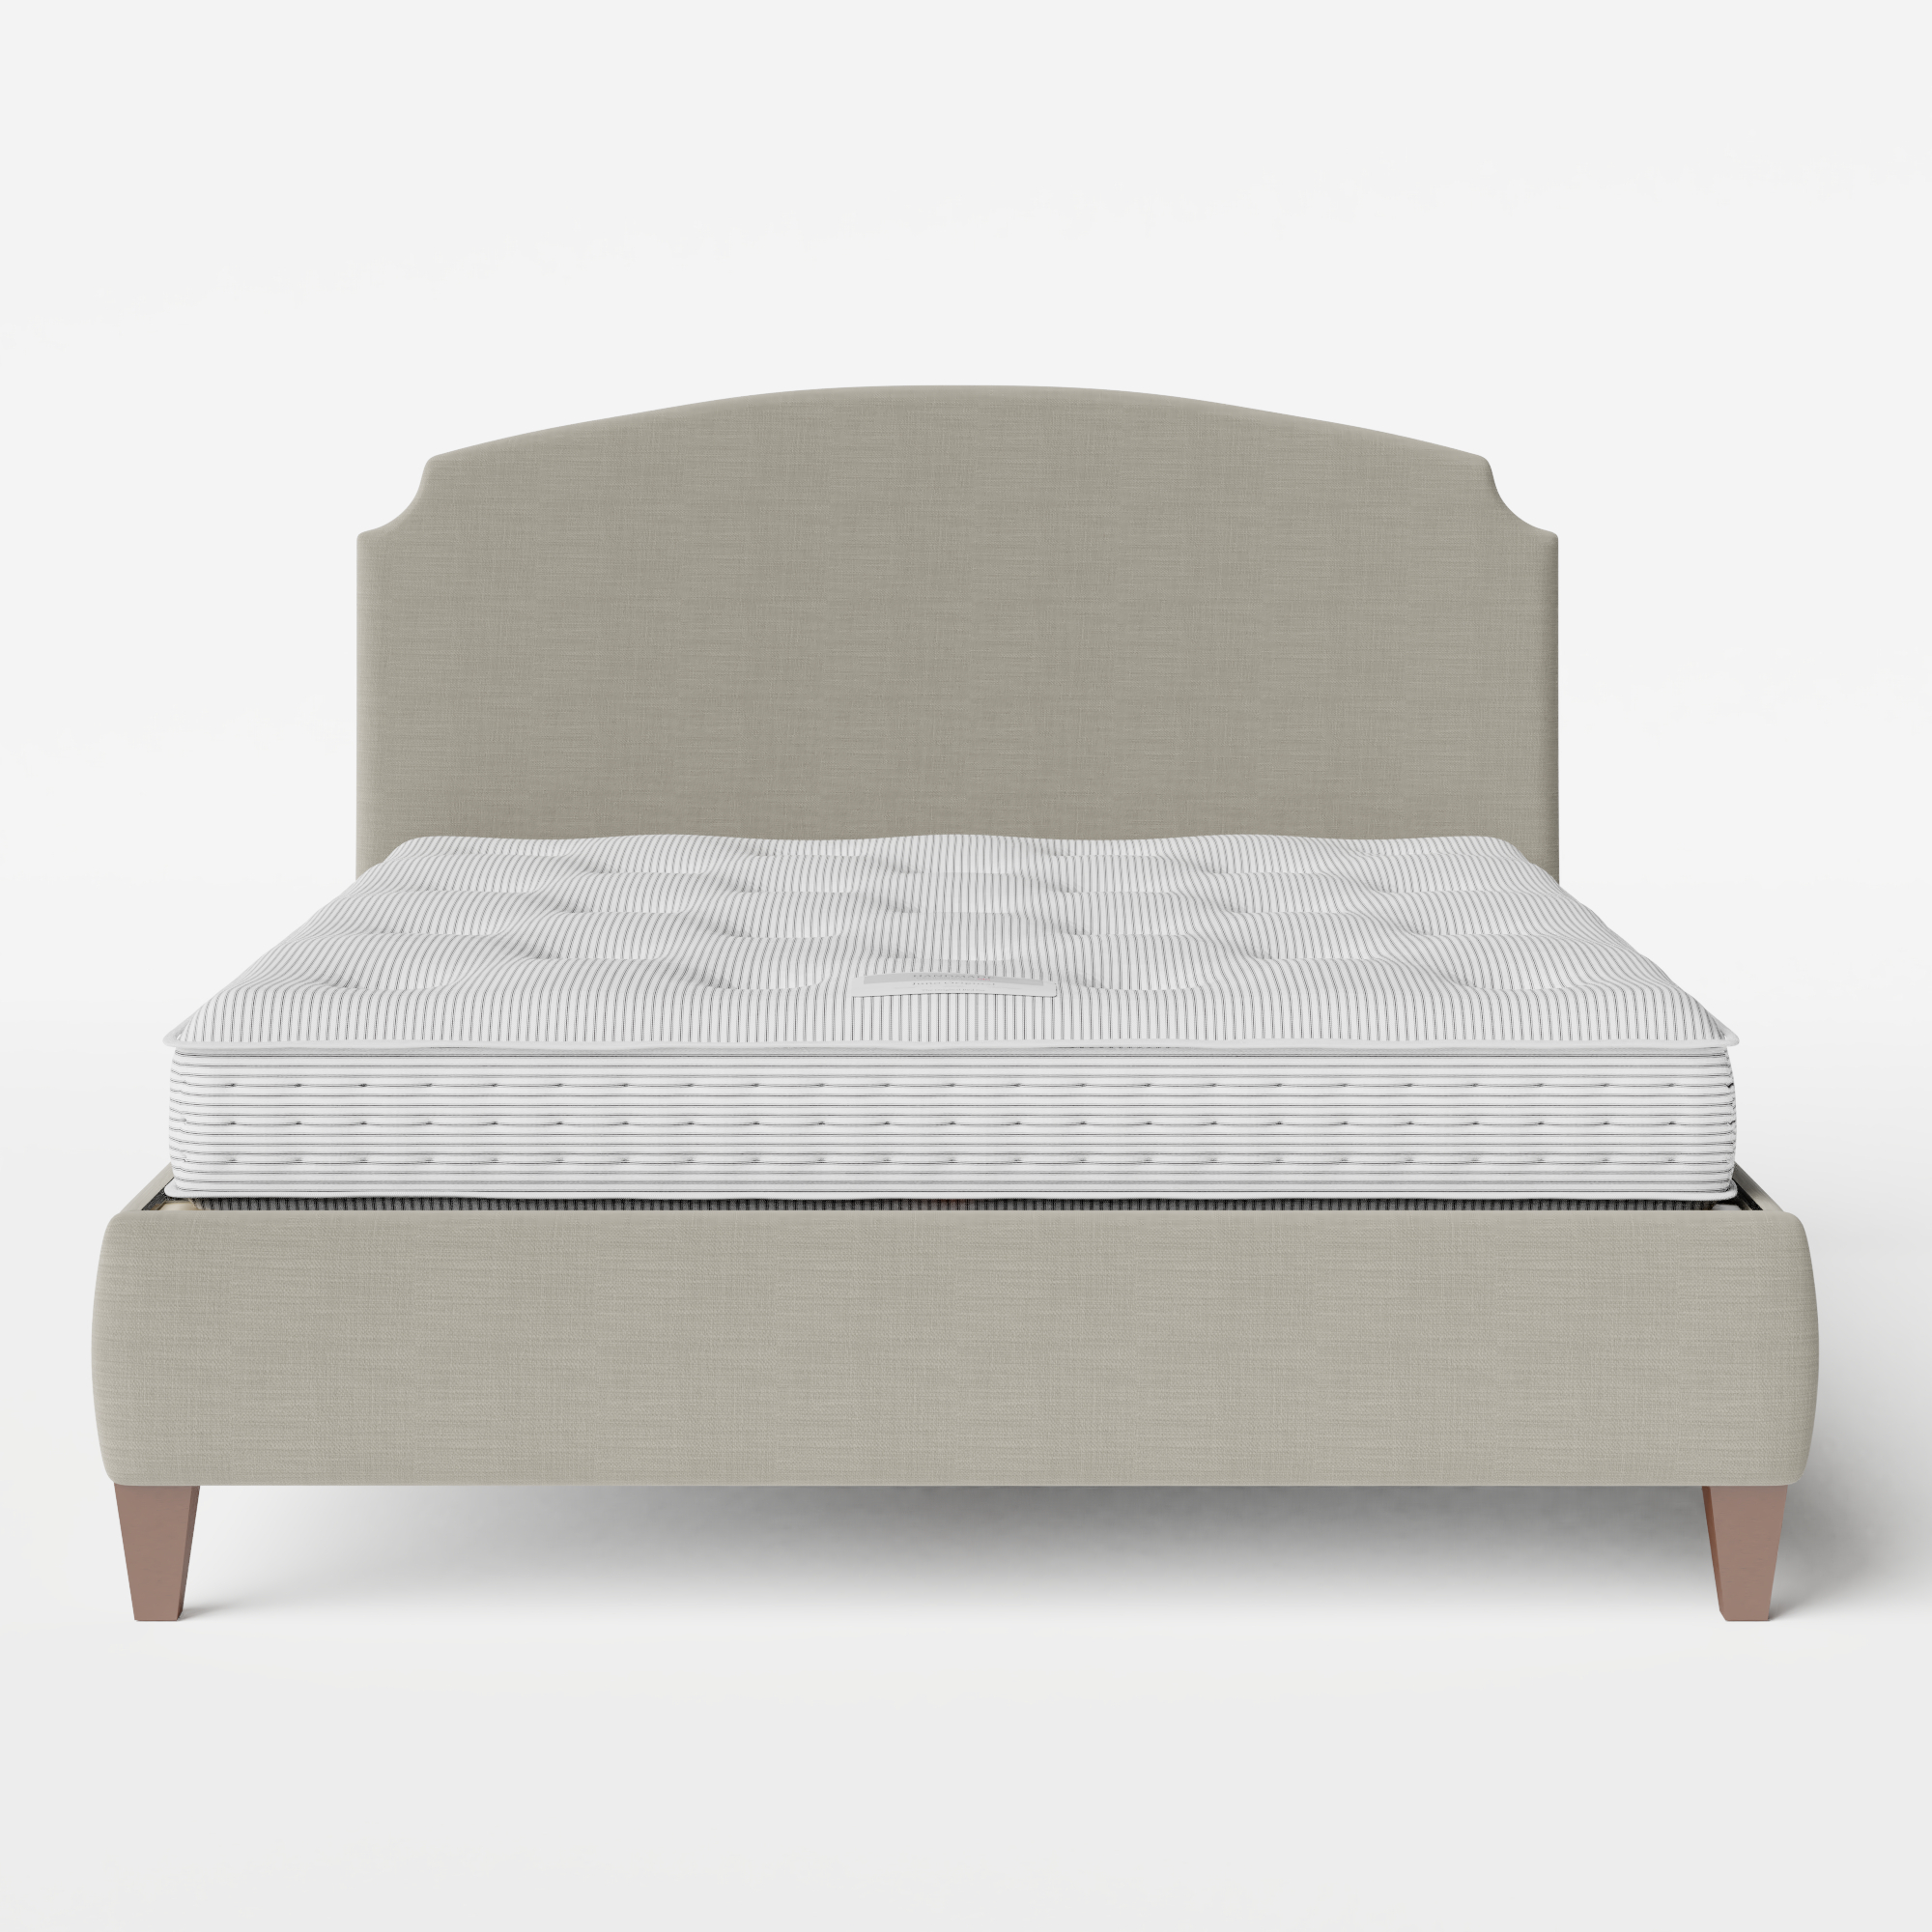 Lide upholstered bed in grey fabric with Juno mattress